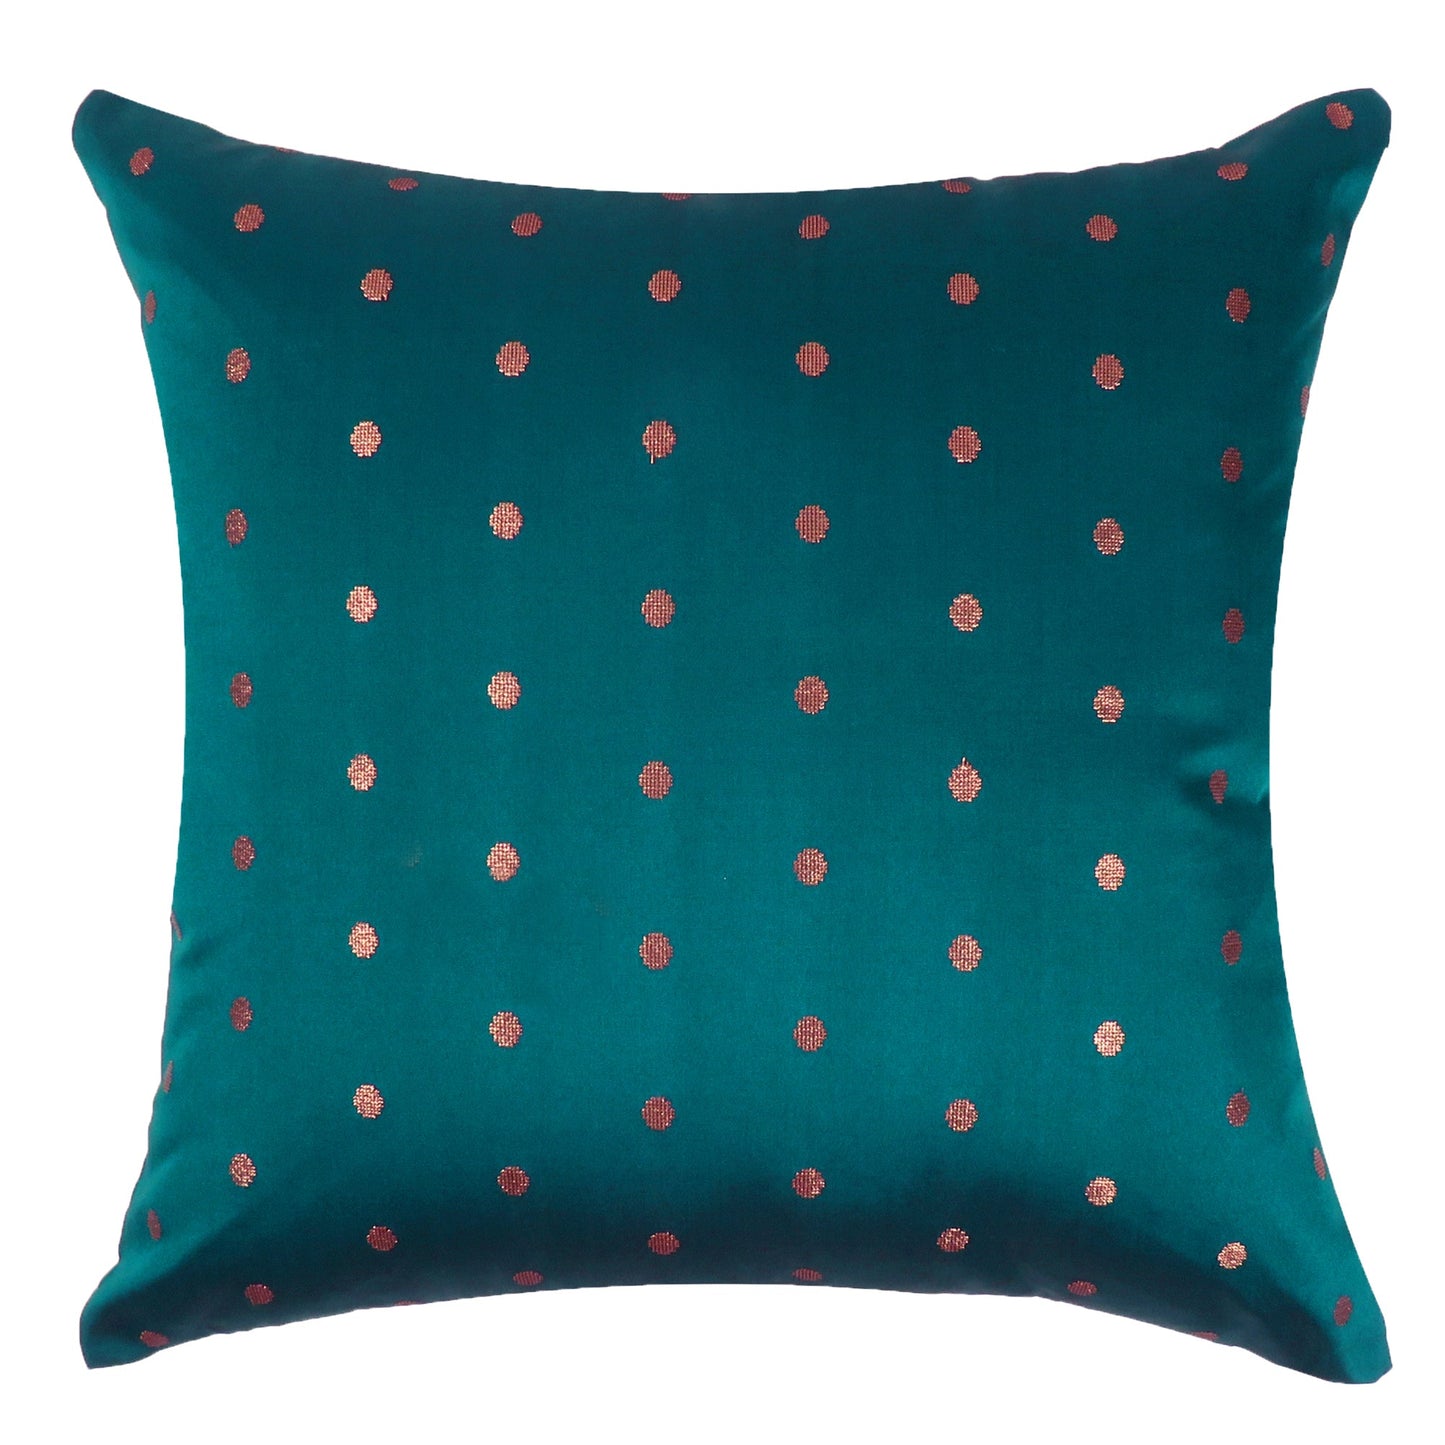 Blue Coral Art Silk Cushion Covers in Set of 2